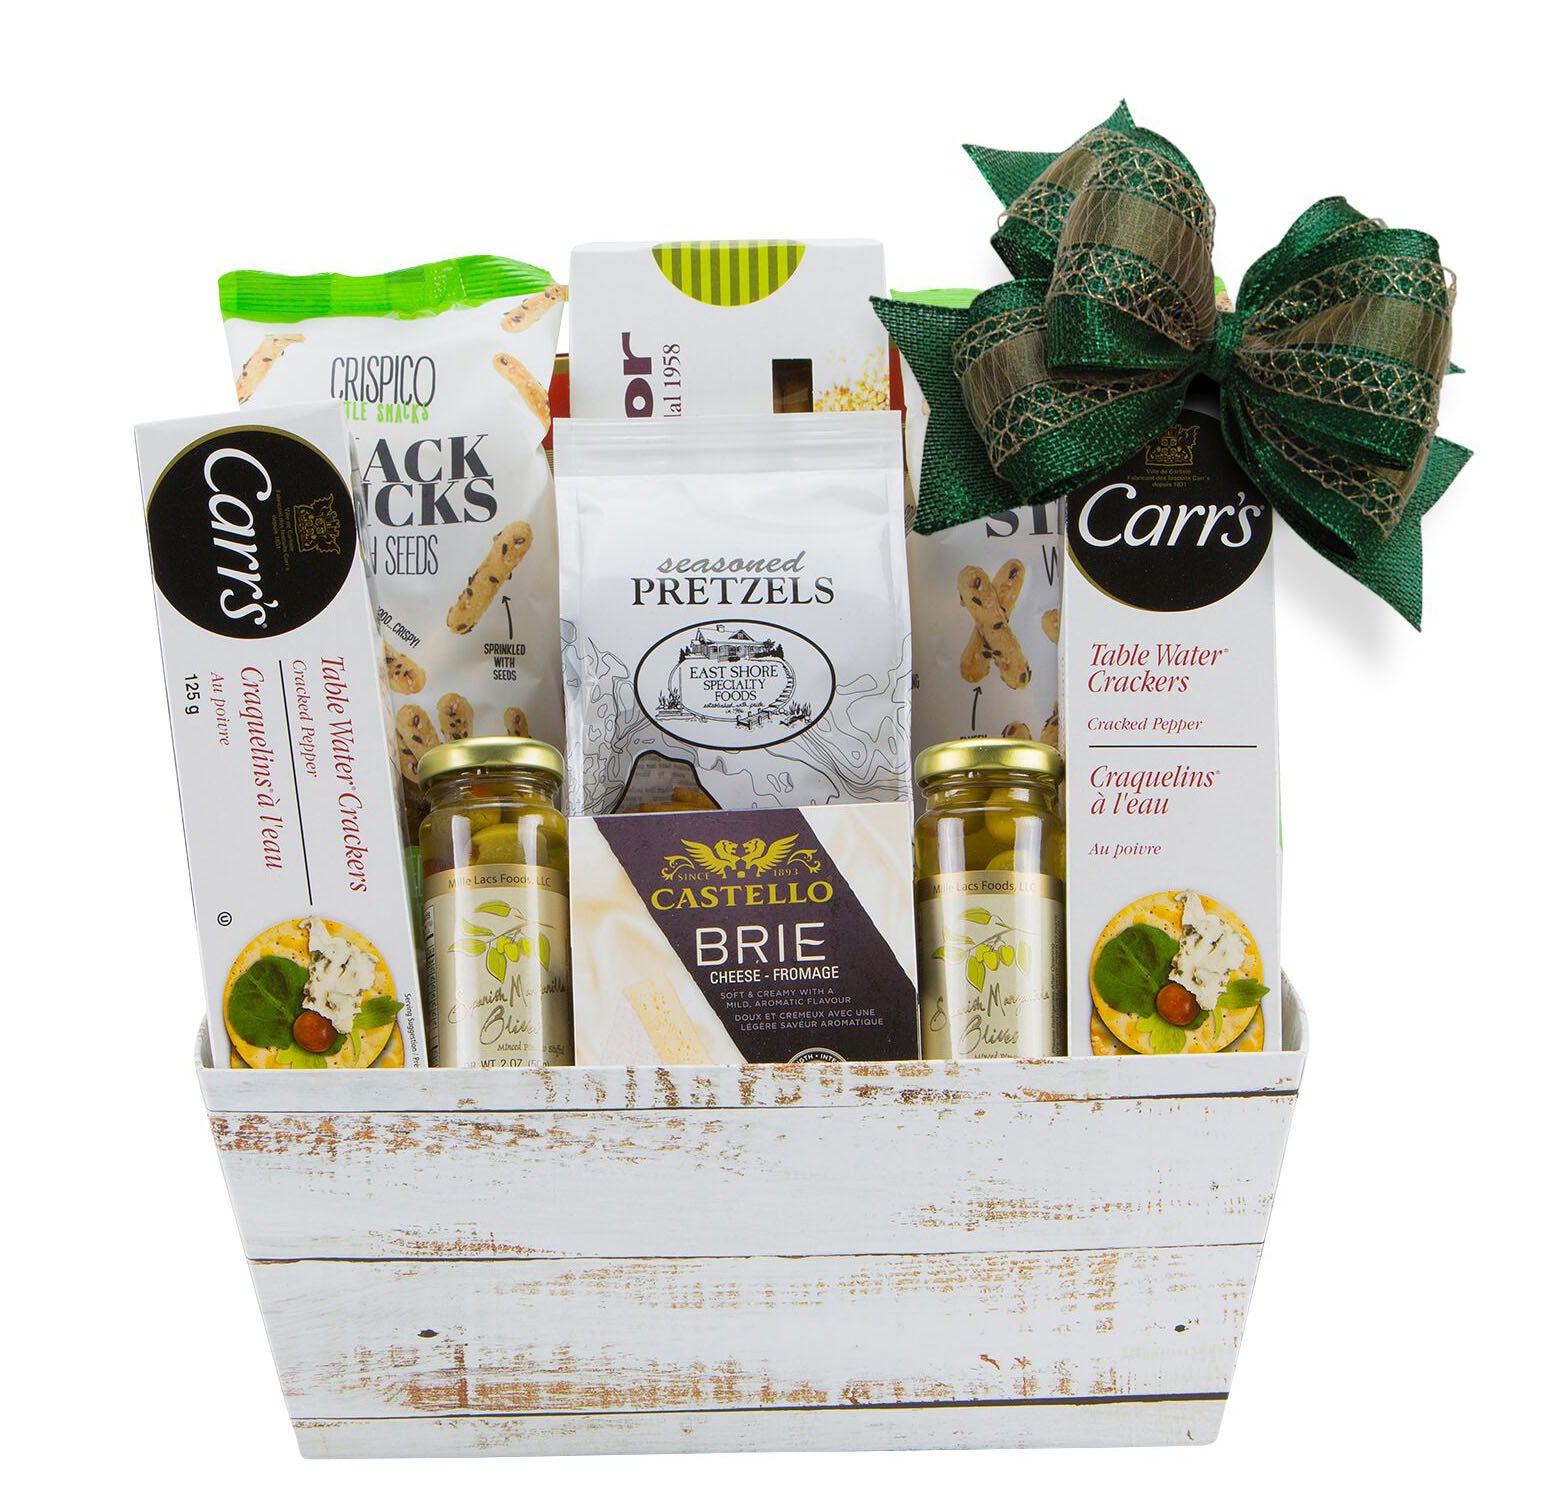 fathers day gift baskets toronto, get well baskets toronto, gourmet food baskets toronto, healthy gift baskets toronto